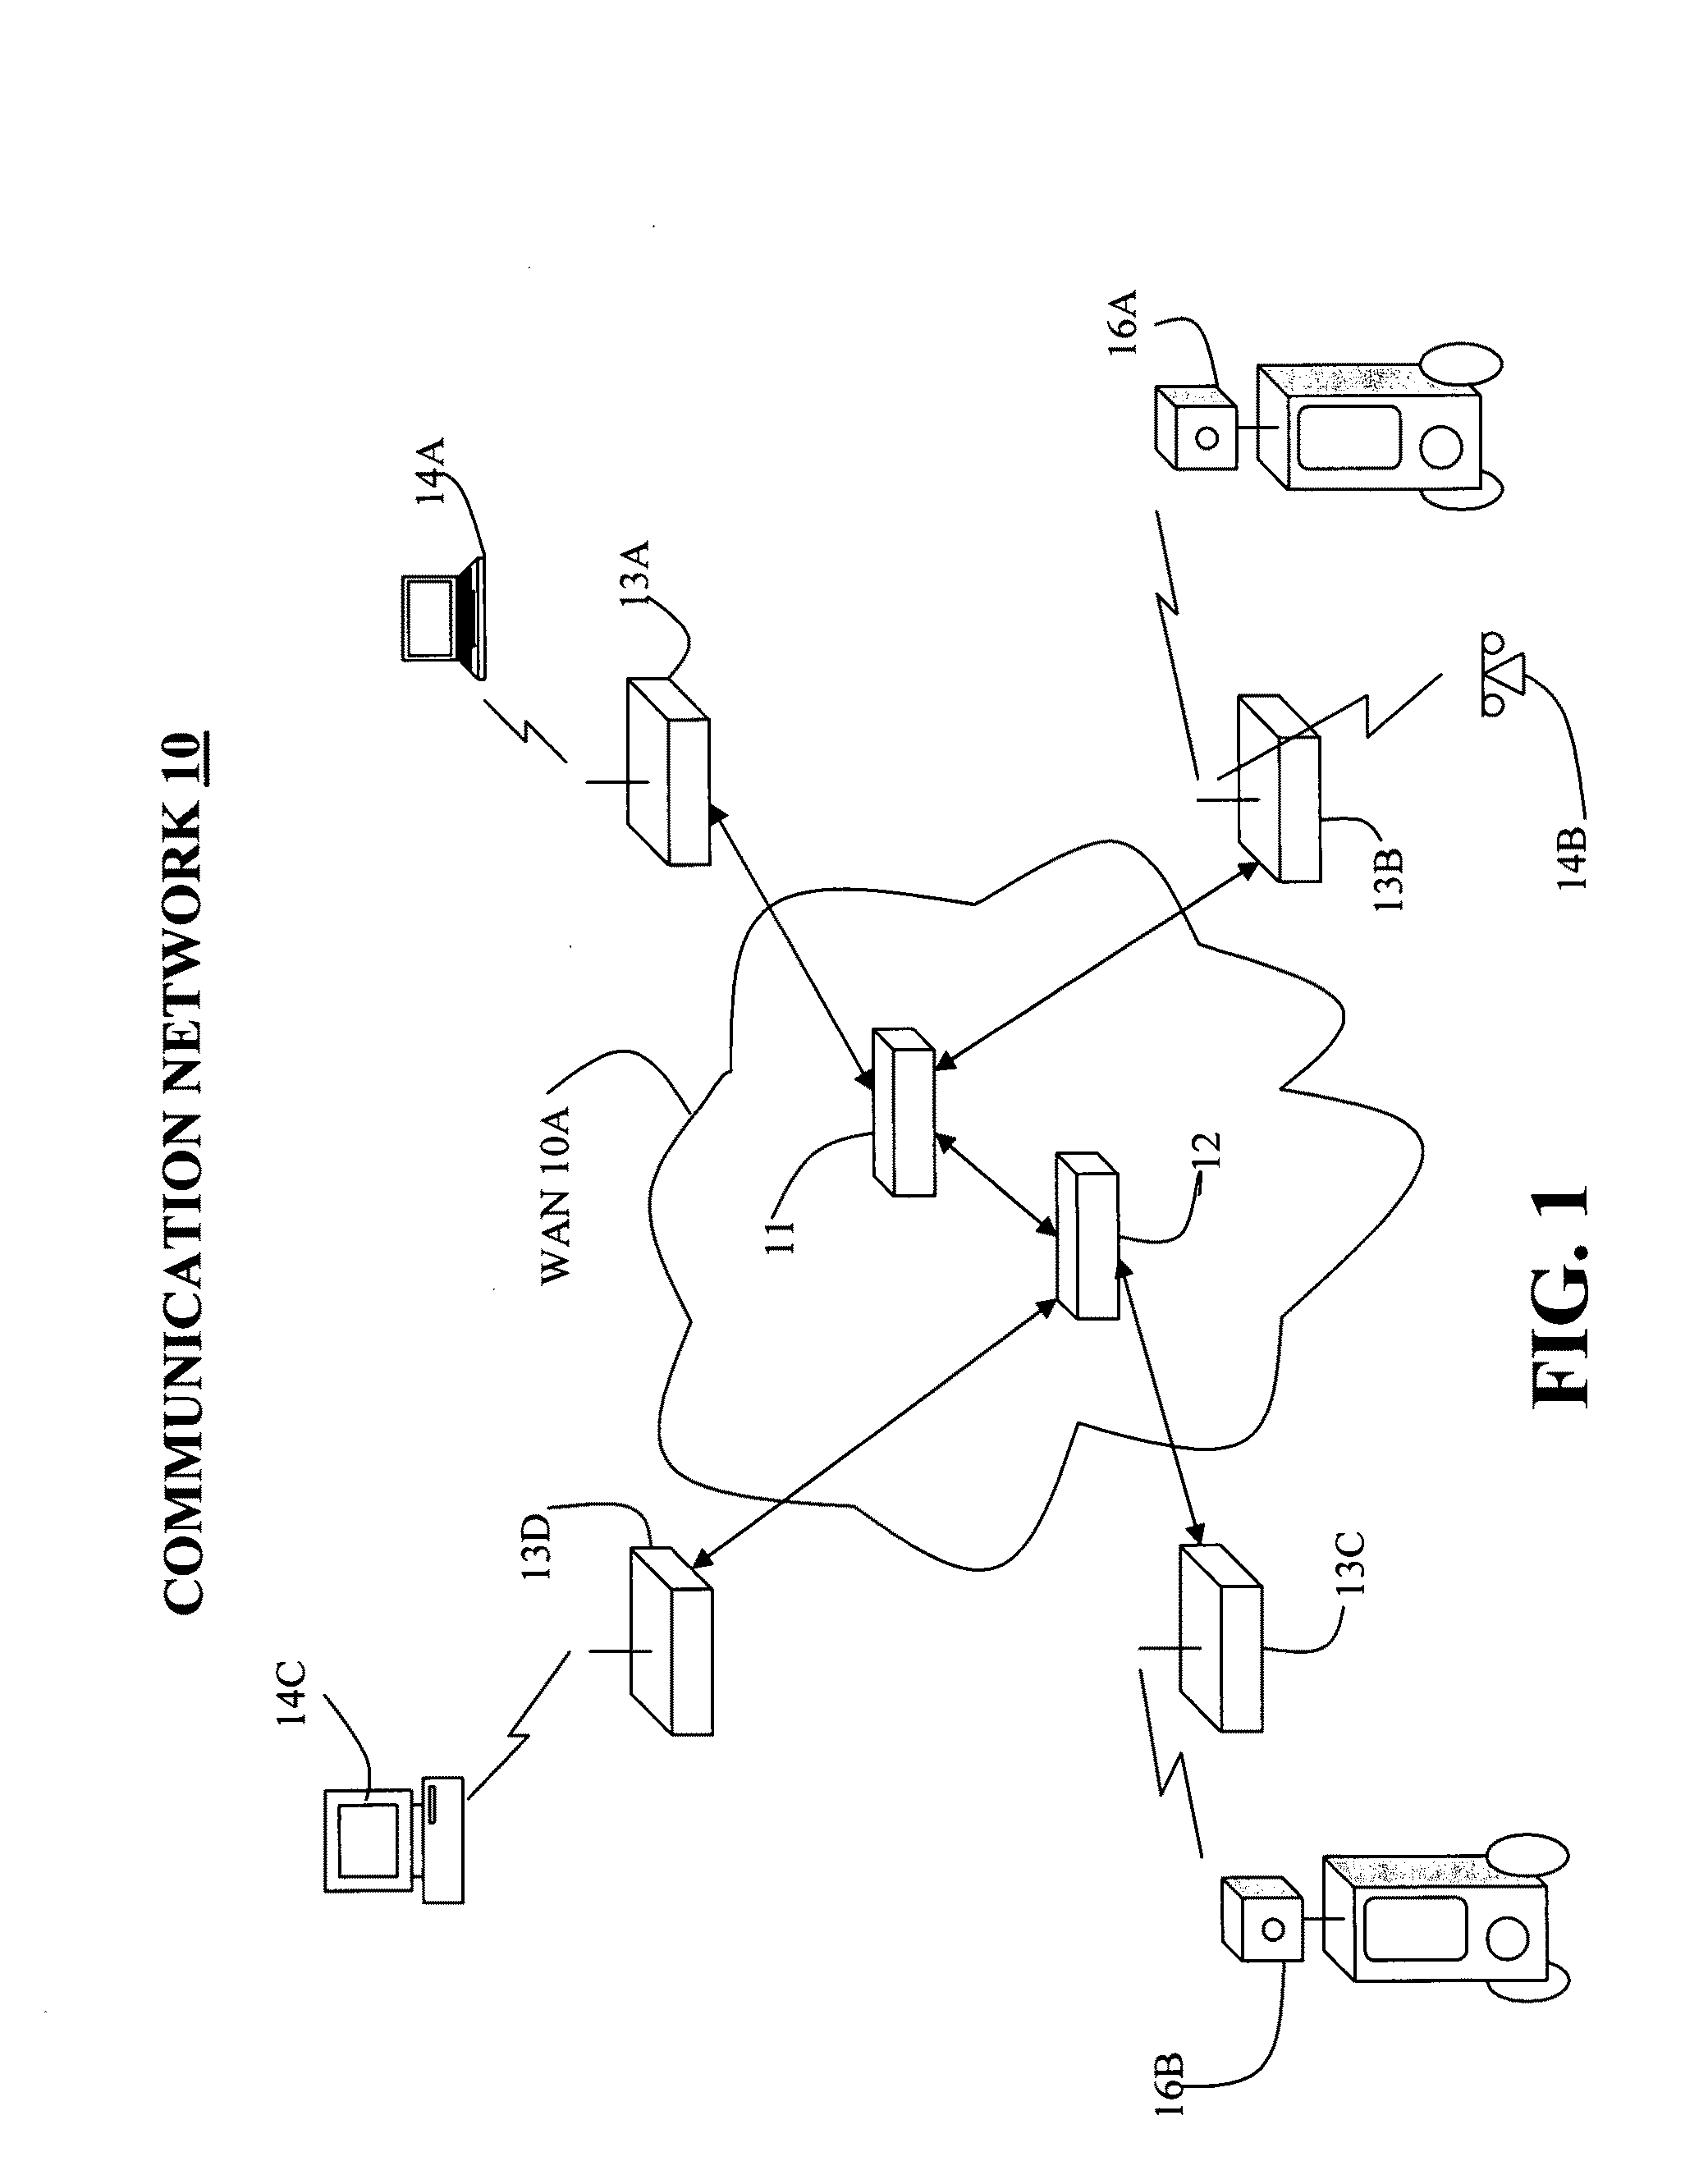 Method & apparatus for remotely operating a robotic device linked to a communications network